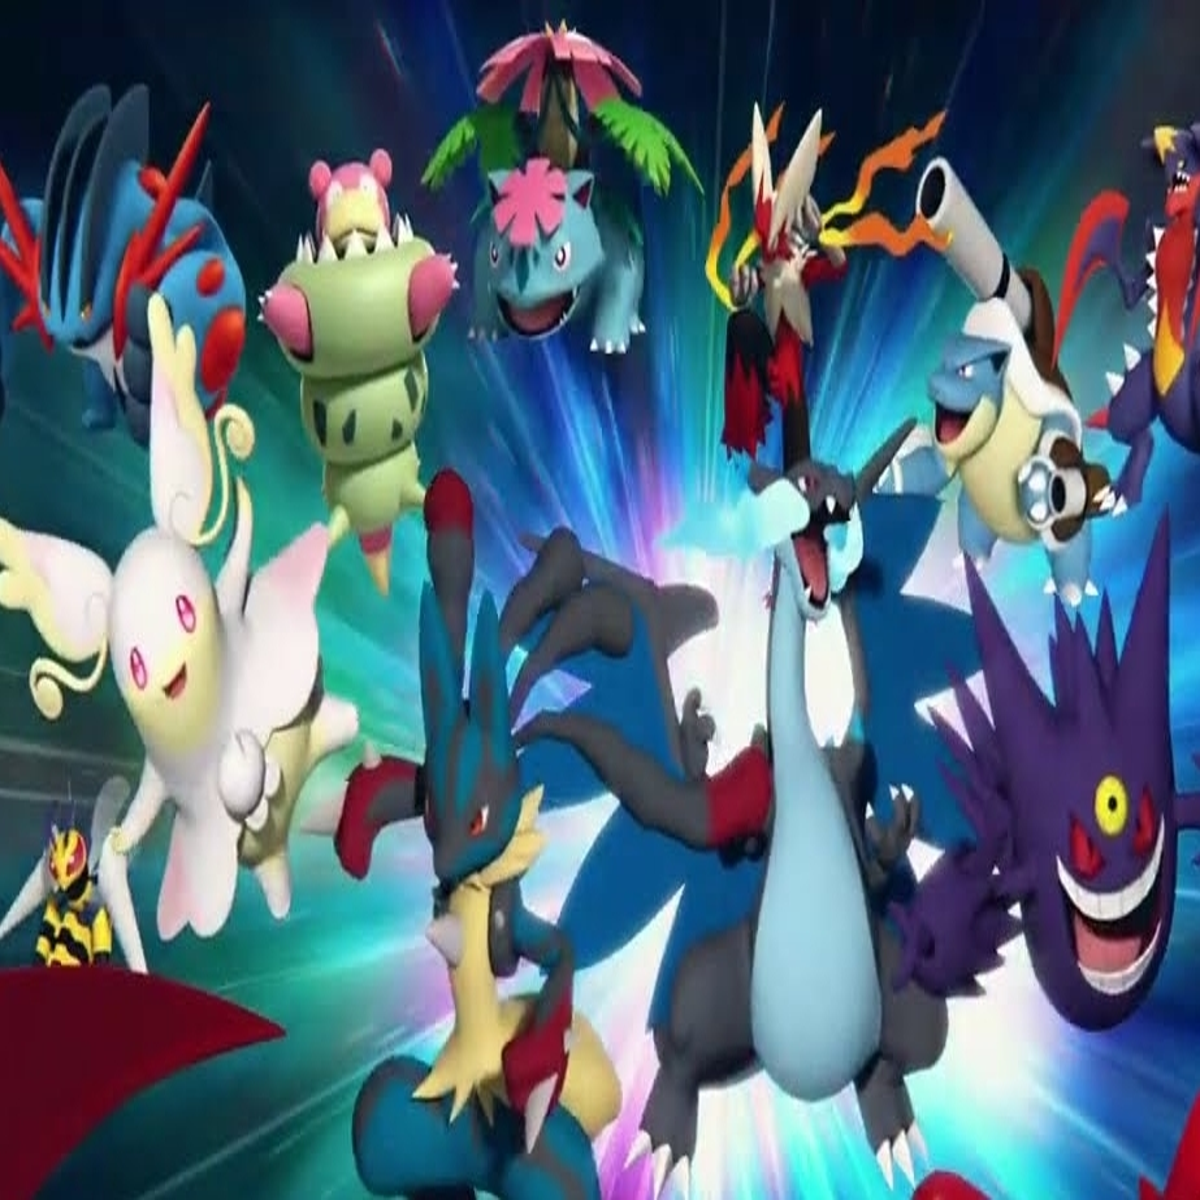 Pokemon Mega is a story driven RPG with for players to explore the